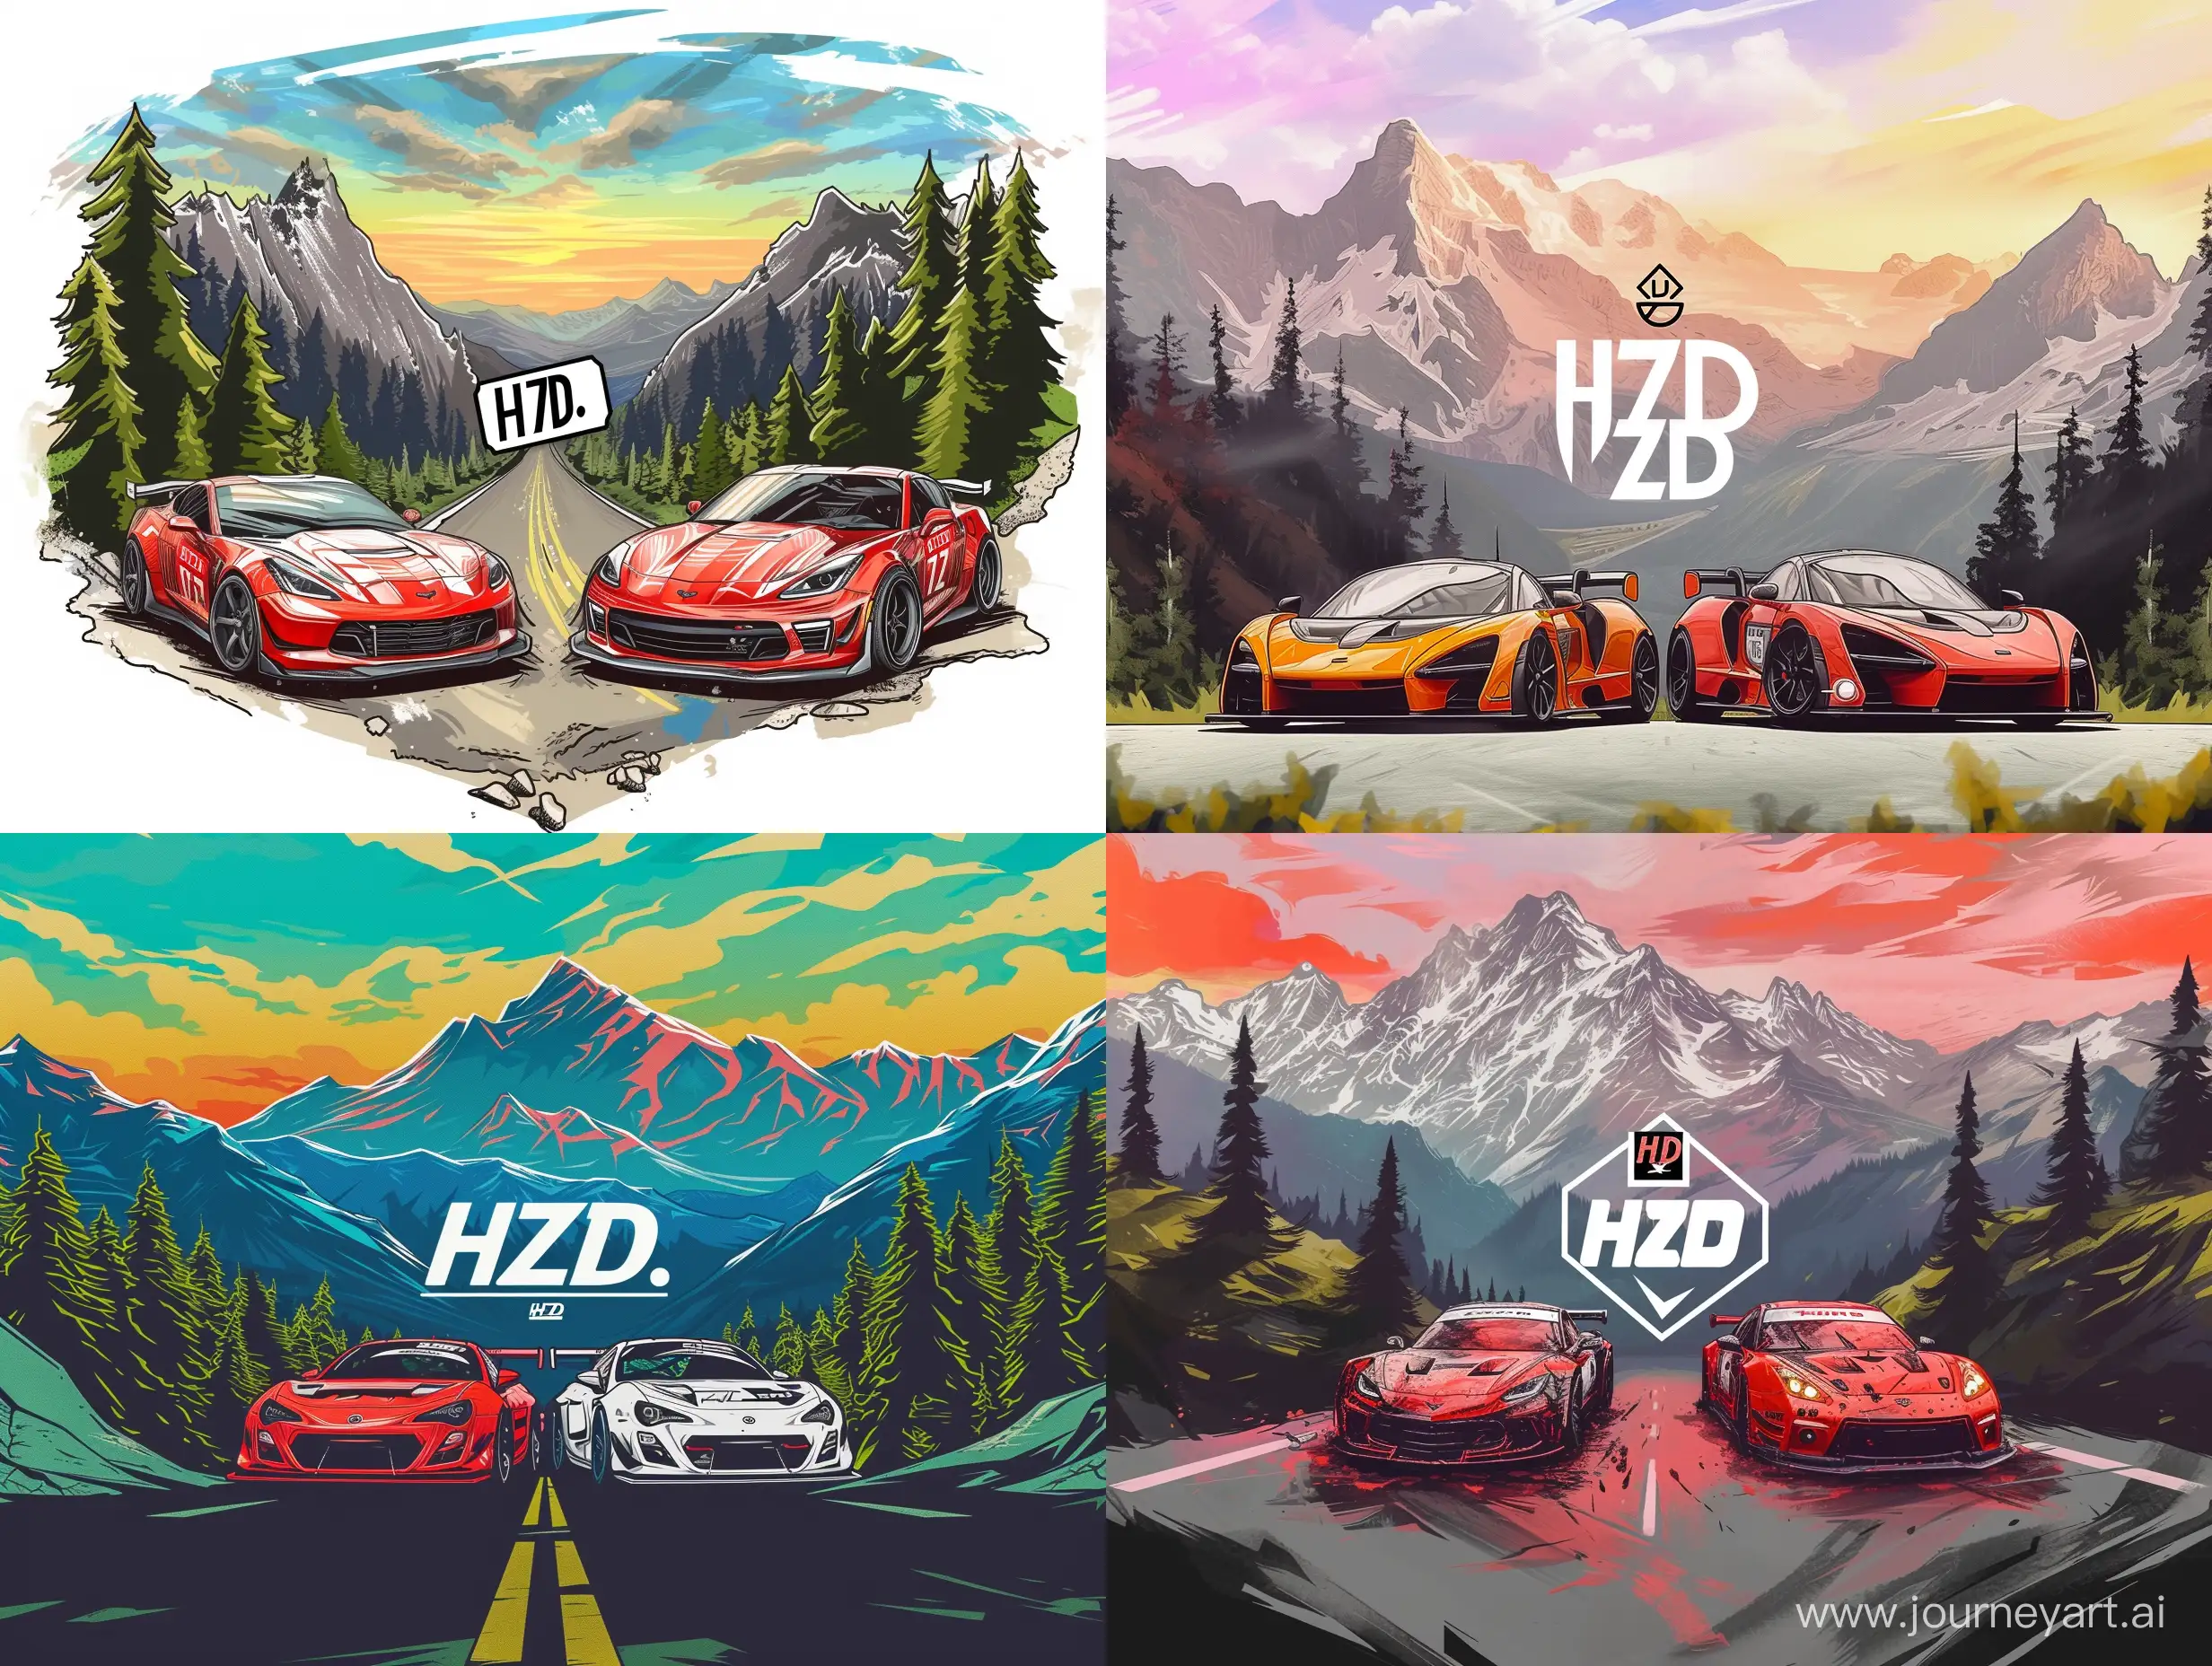 draw style car race logo, couple racing cars,
with HZD tag in the middle, mountains with trees with road in backround